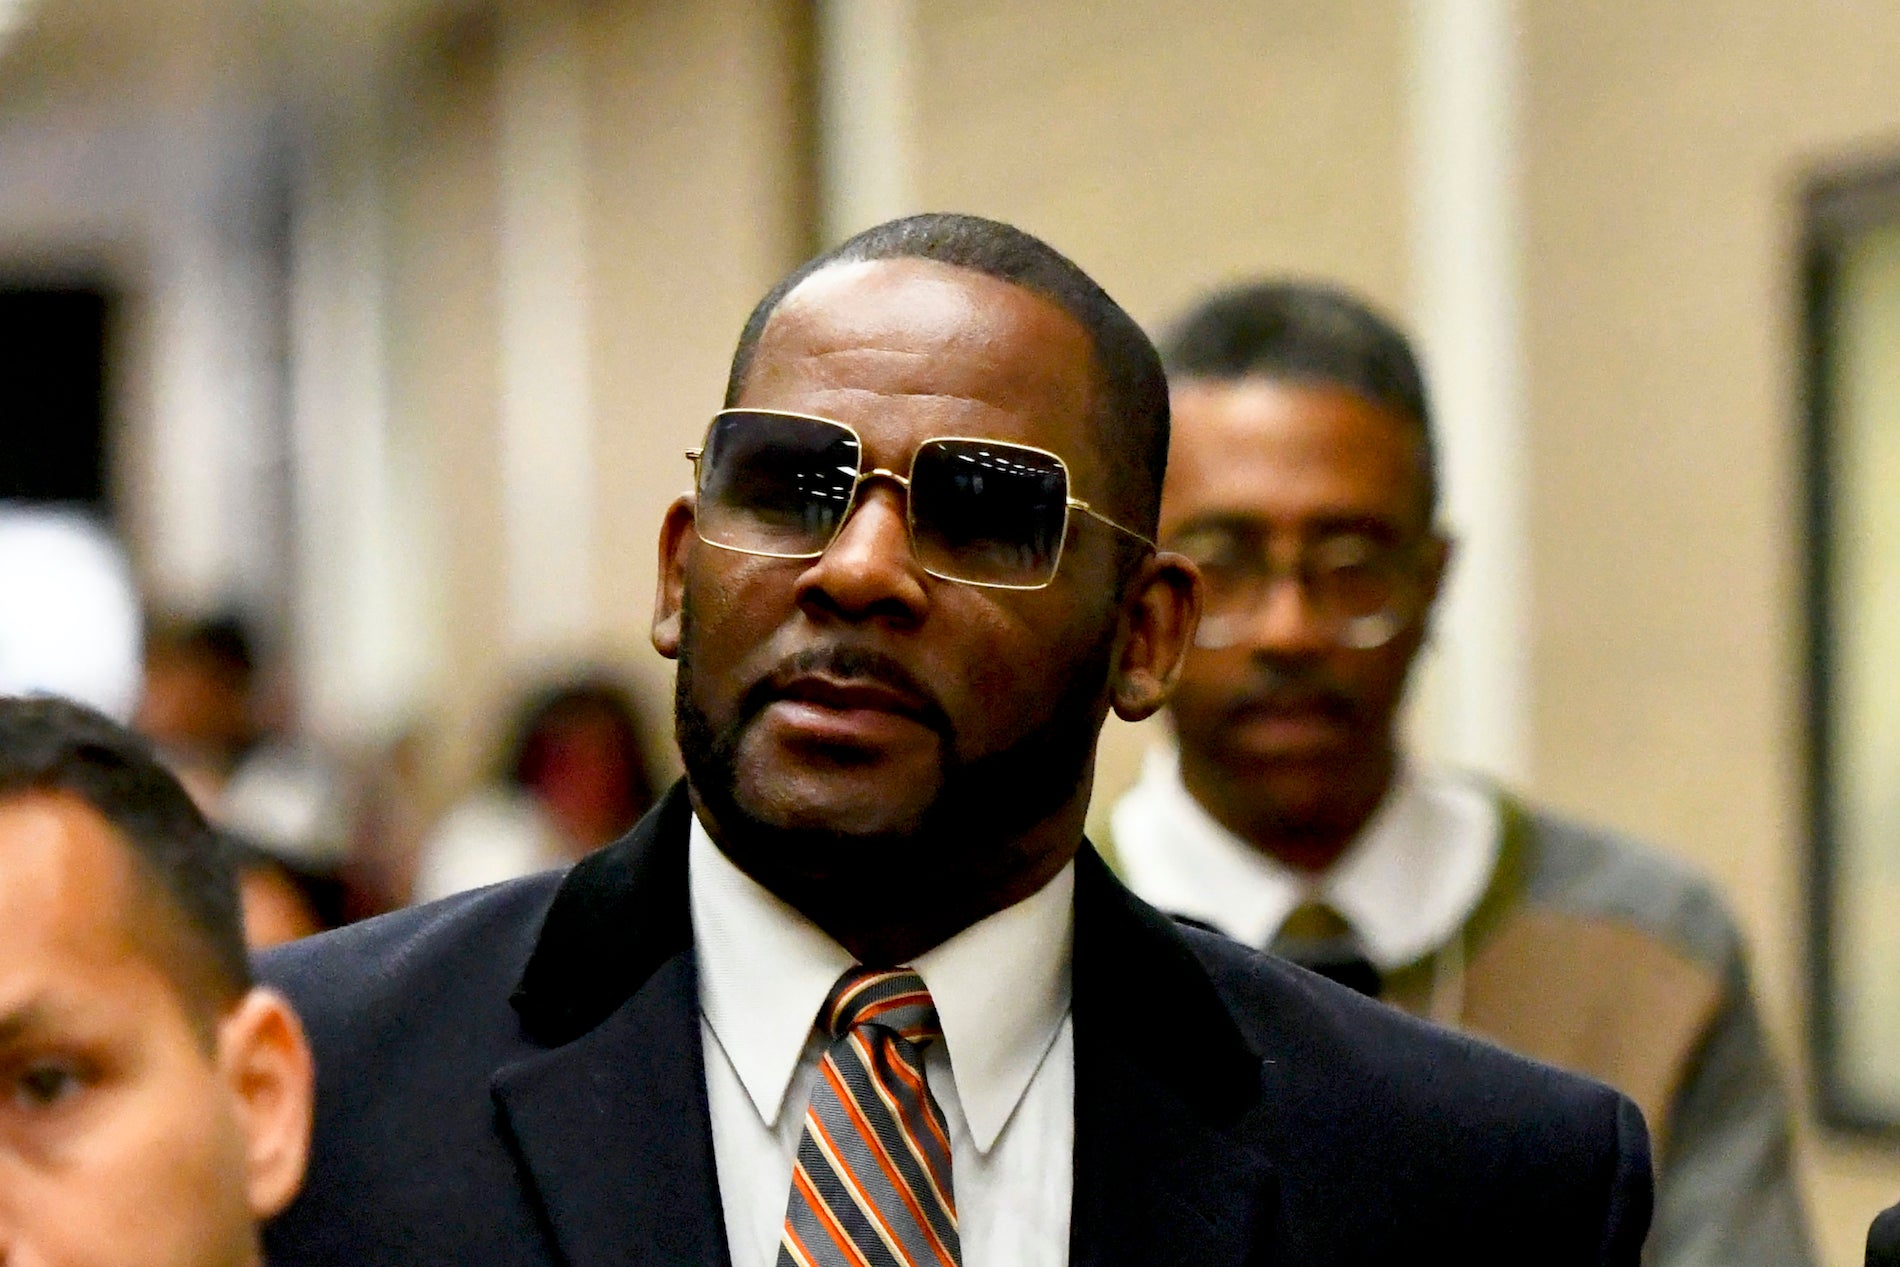 Msex With Young Aunt - R. Kelly convicted on many counts, acquitted of trial fixing - WHYY